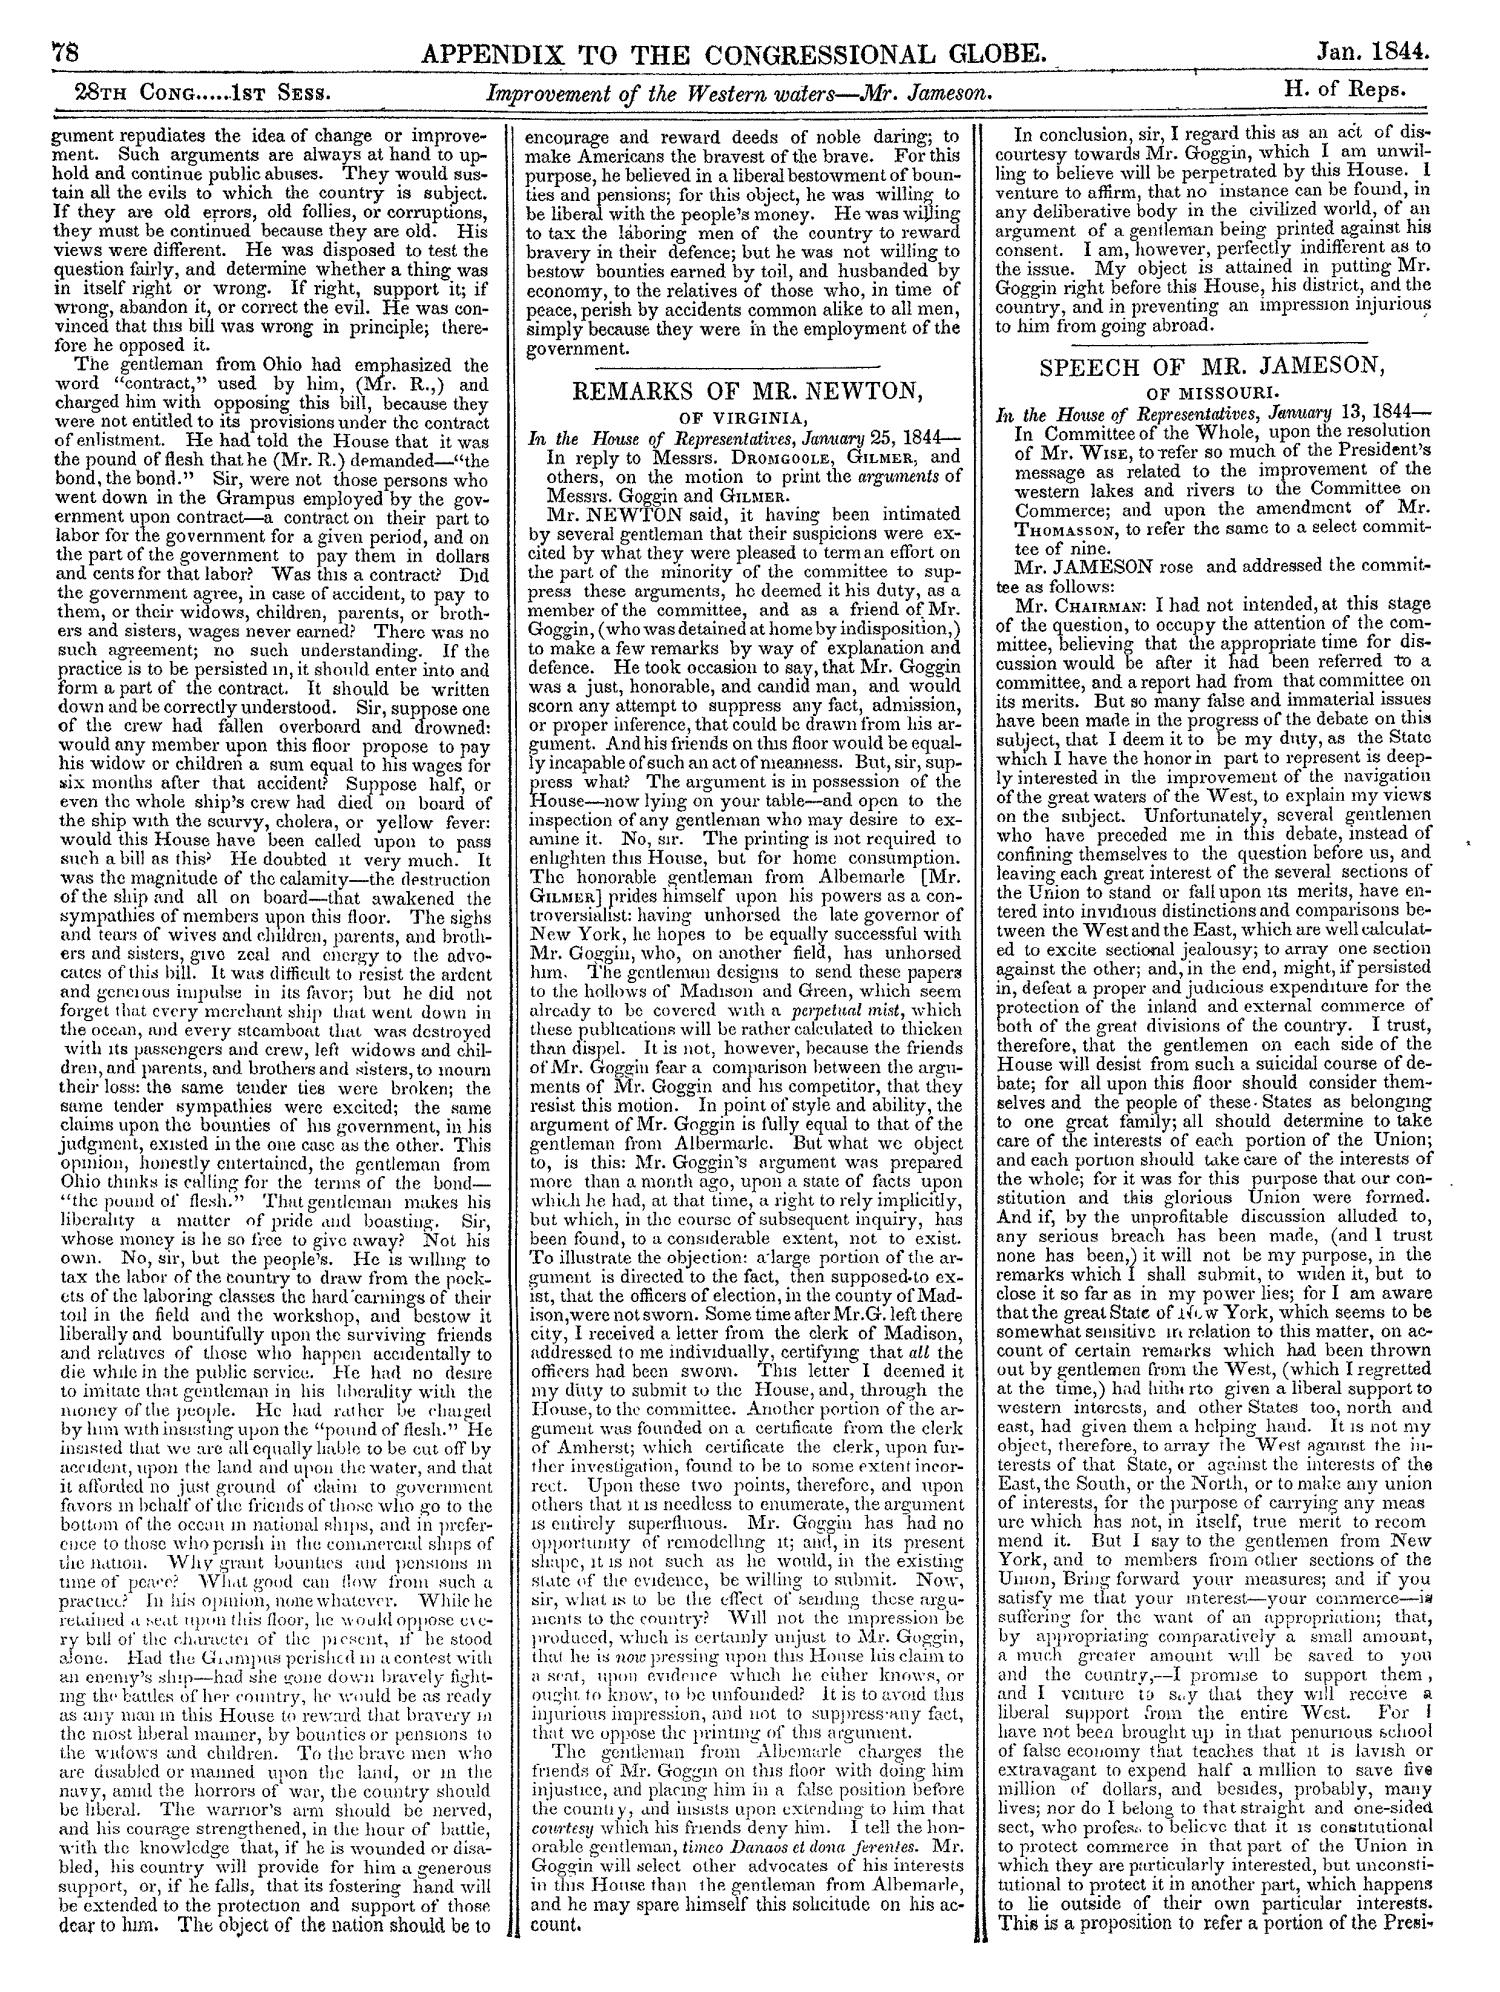 The Congressional Globe, Volume 13, Part 2: Twenty-Eighth Congress, First Session
                                                
                                                    78
                                                